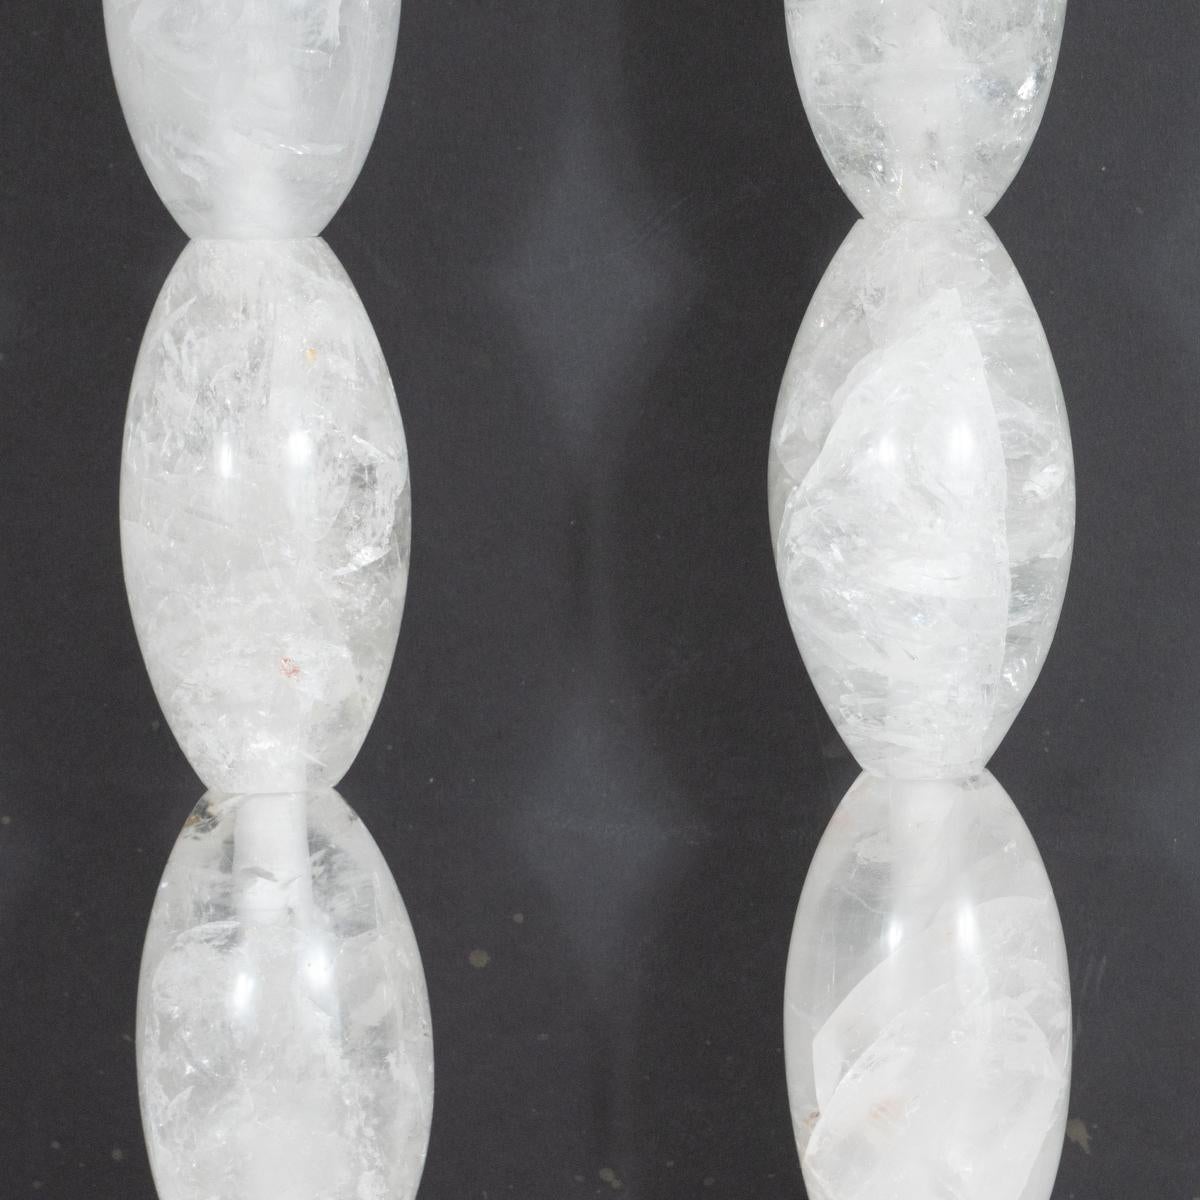 Pair of Hand-Cut and Polished Stacked Rock Crystal Table Lamps by Spark Interior In New Condition For Sale In Tarrytown, NY